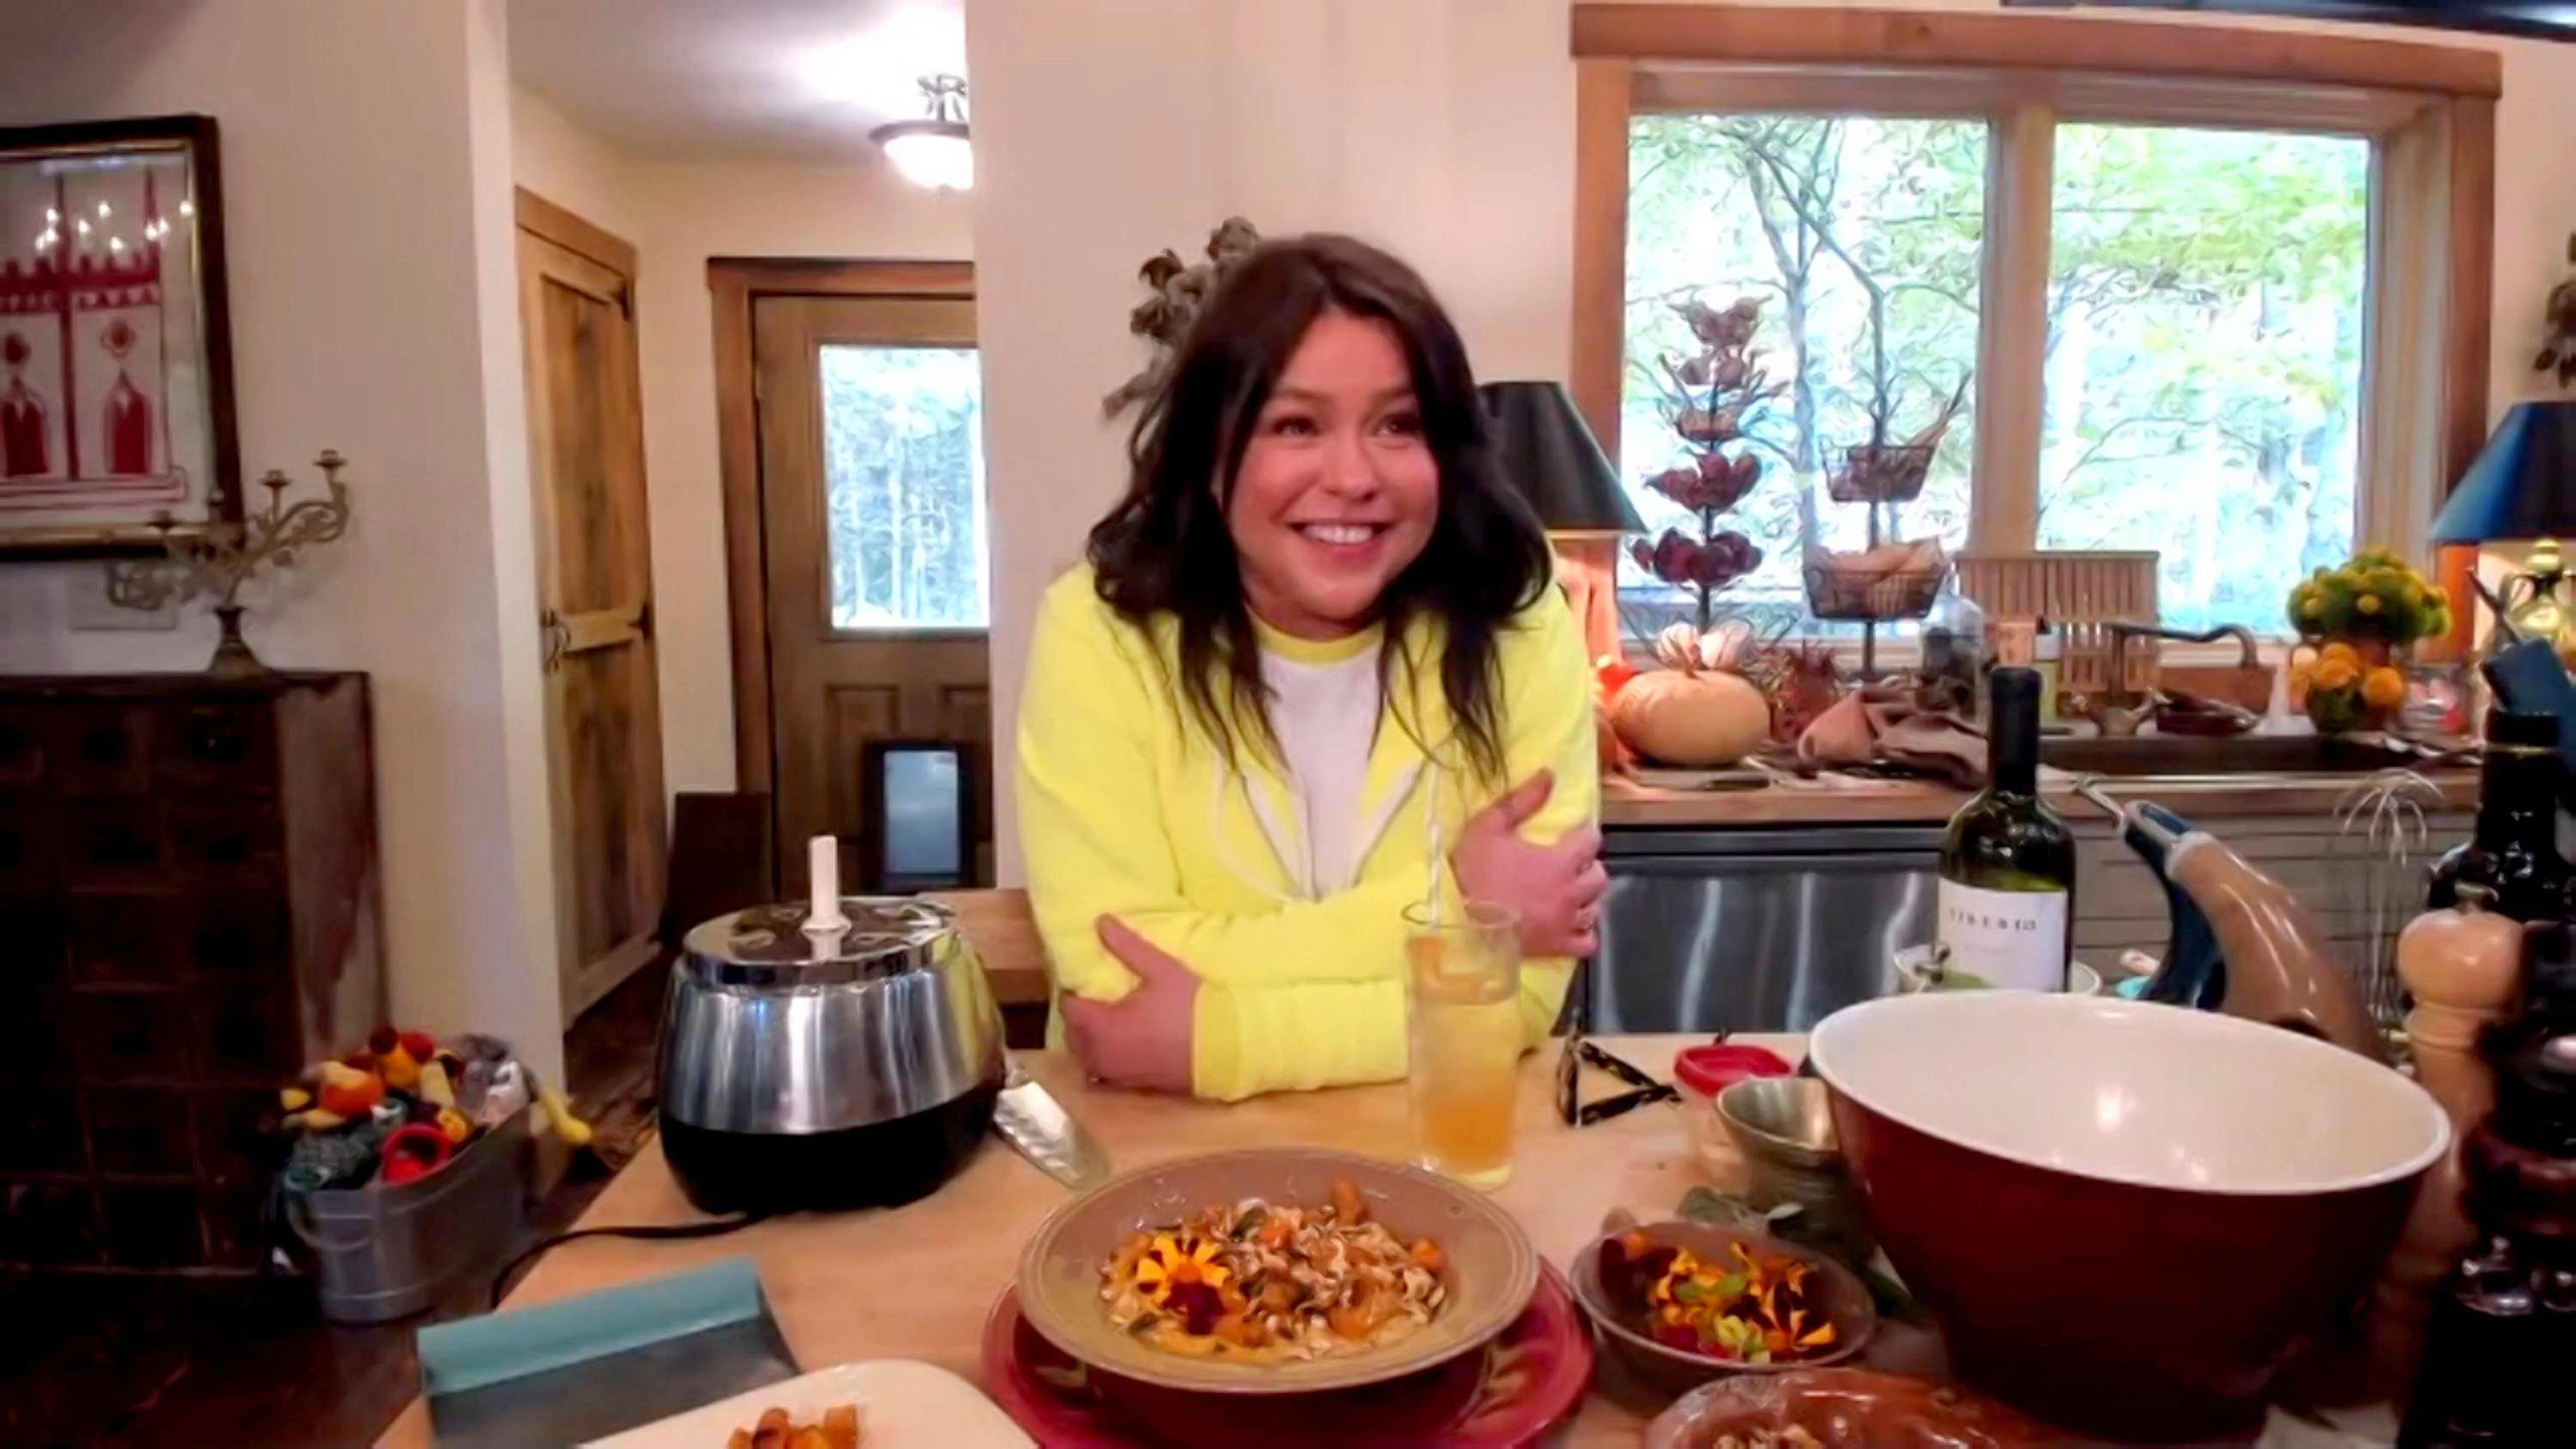 Celebrity chef Rachael Ray wears a yellow sweater in this photograph.